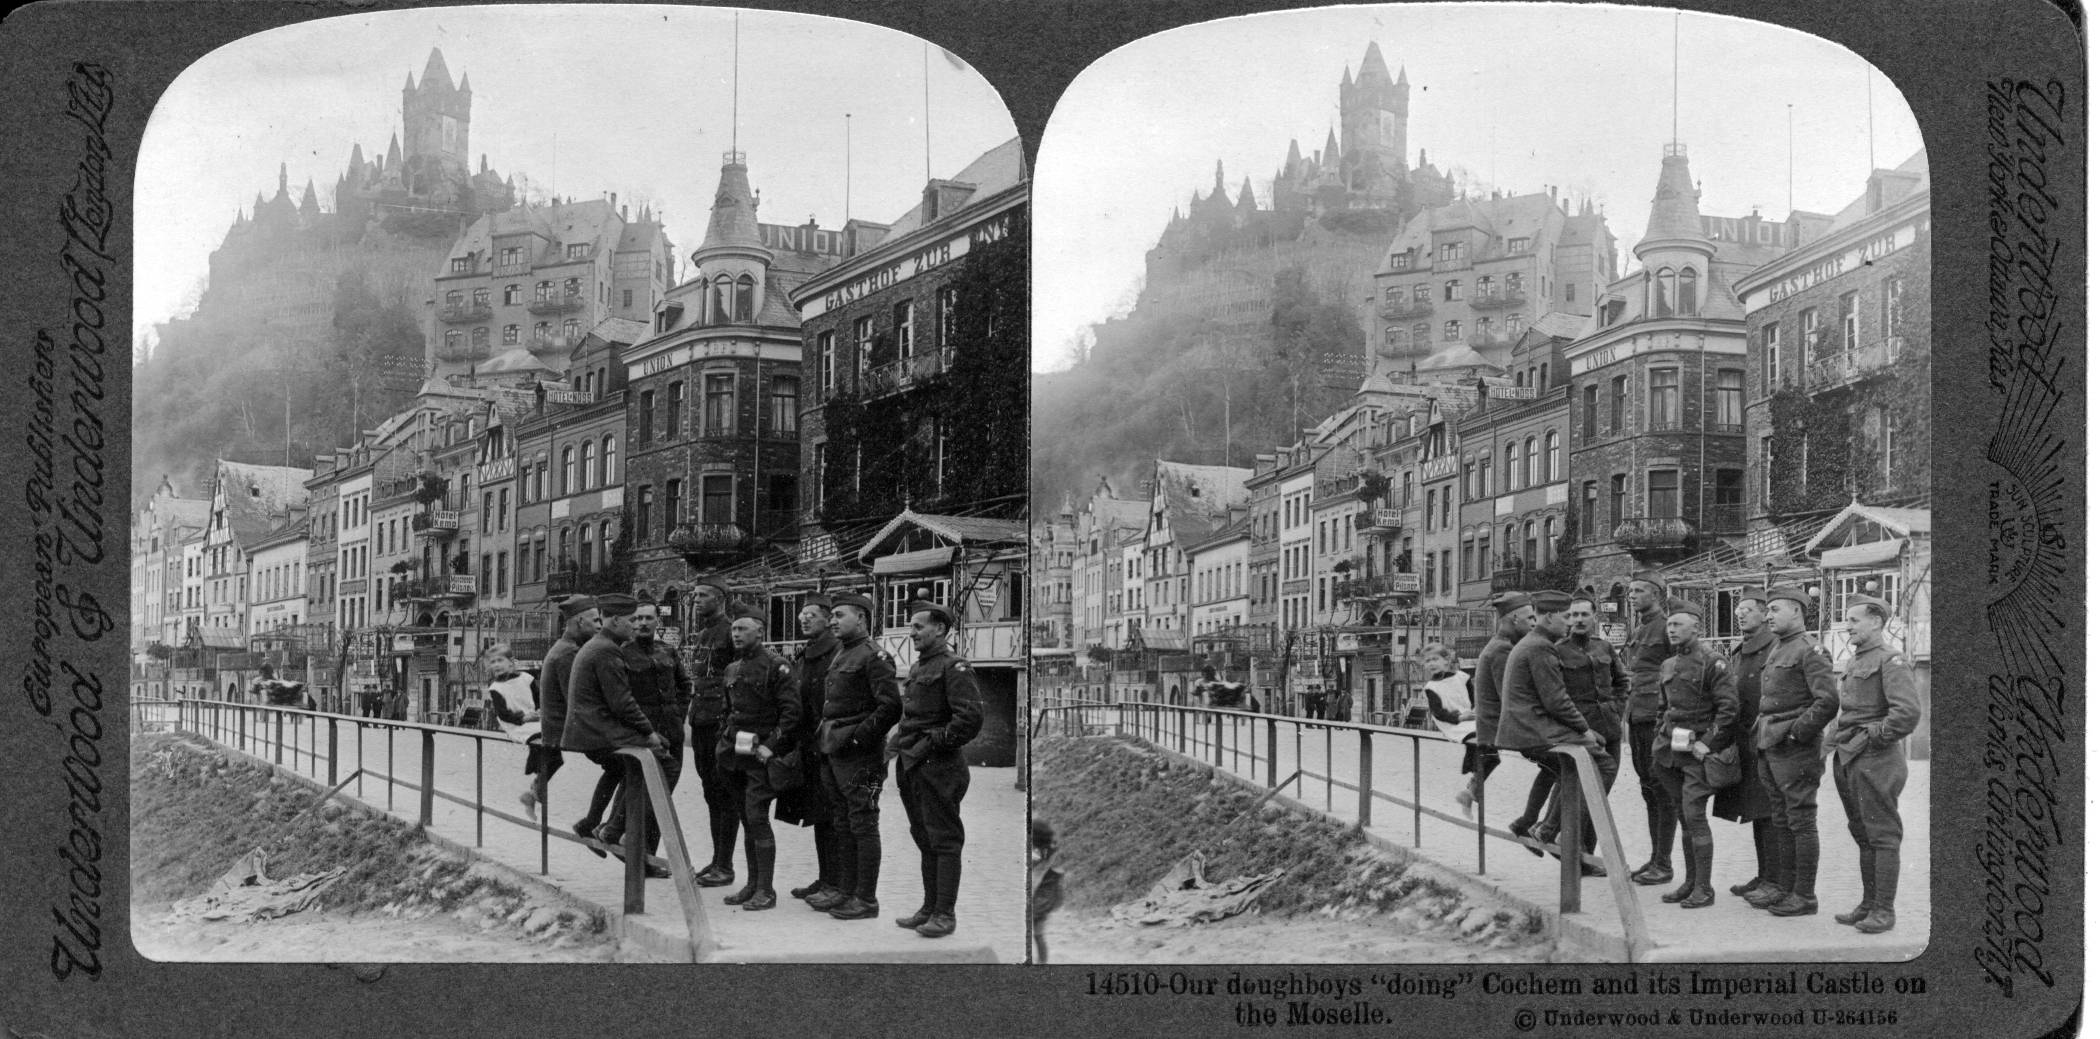 Our doughboys "doing" Cochem and its Imperial Castle on the Moselle